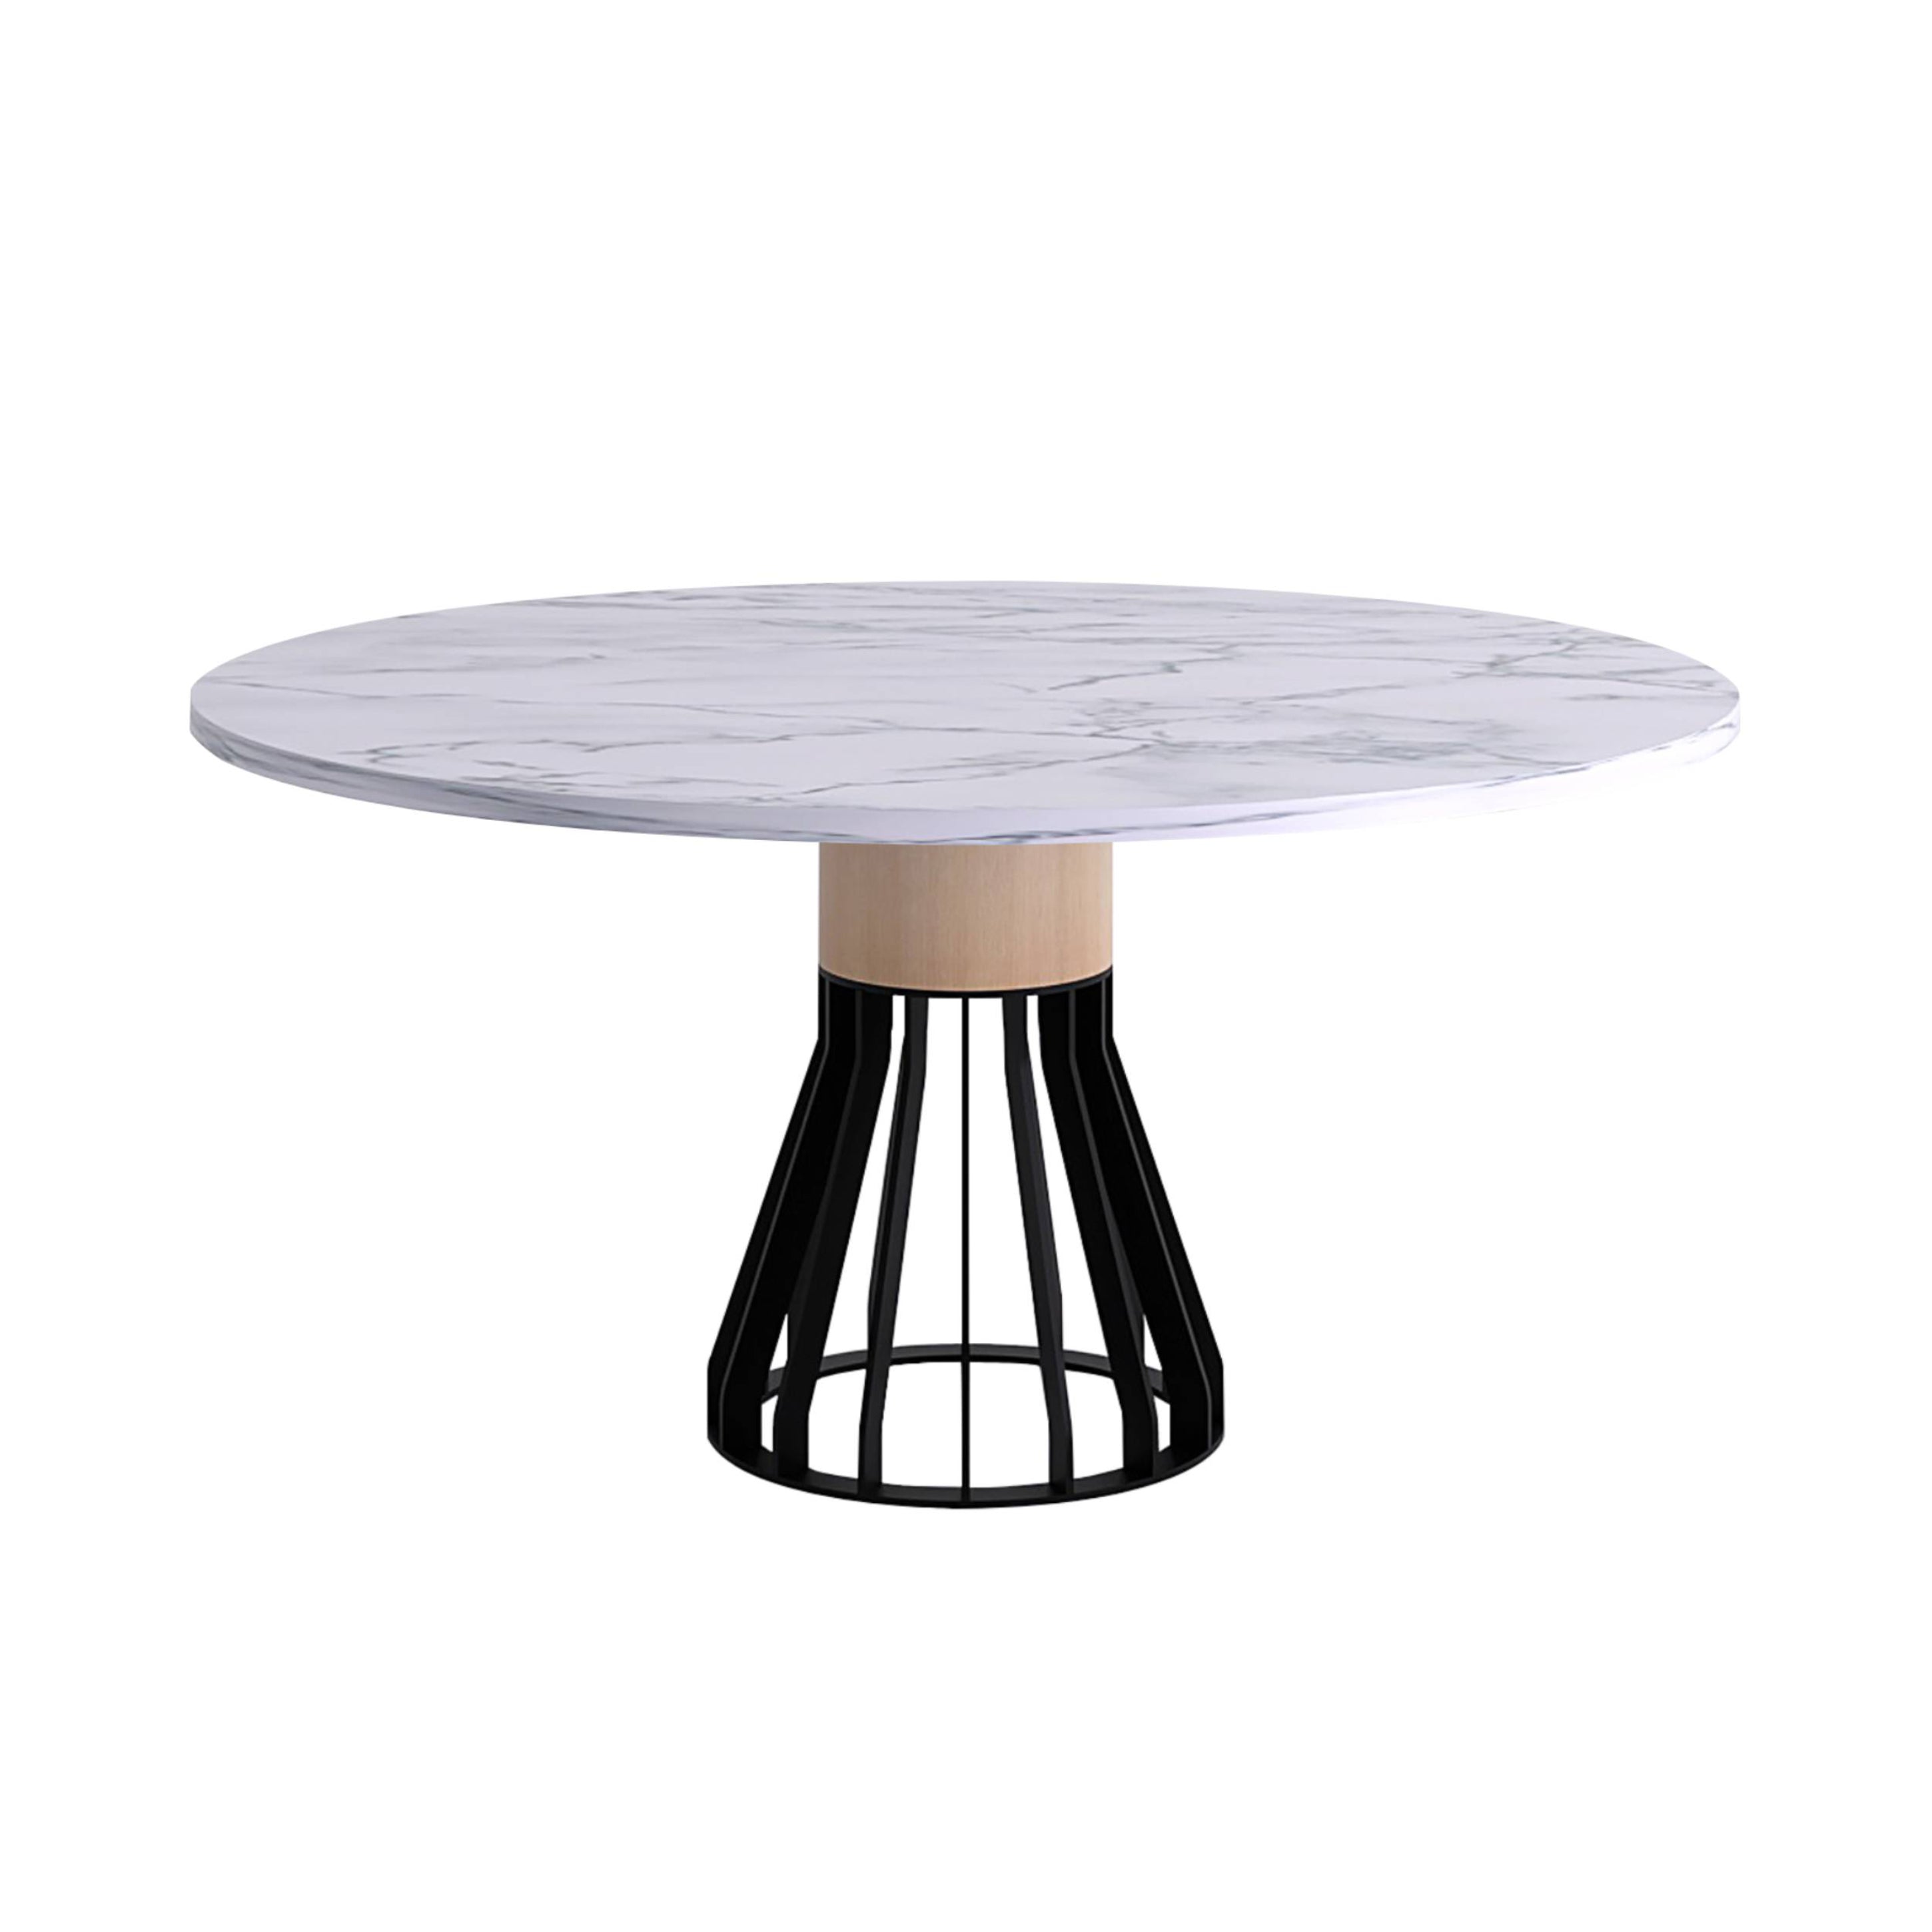 Mewoma Round Dining Table Large - 59.1